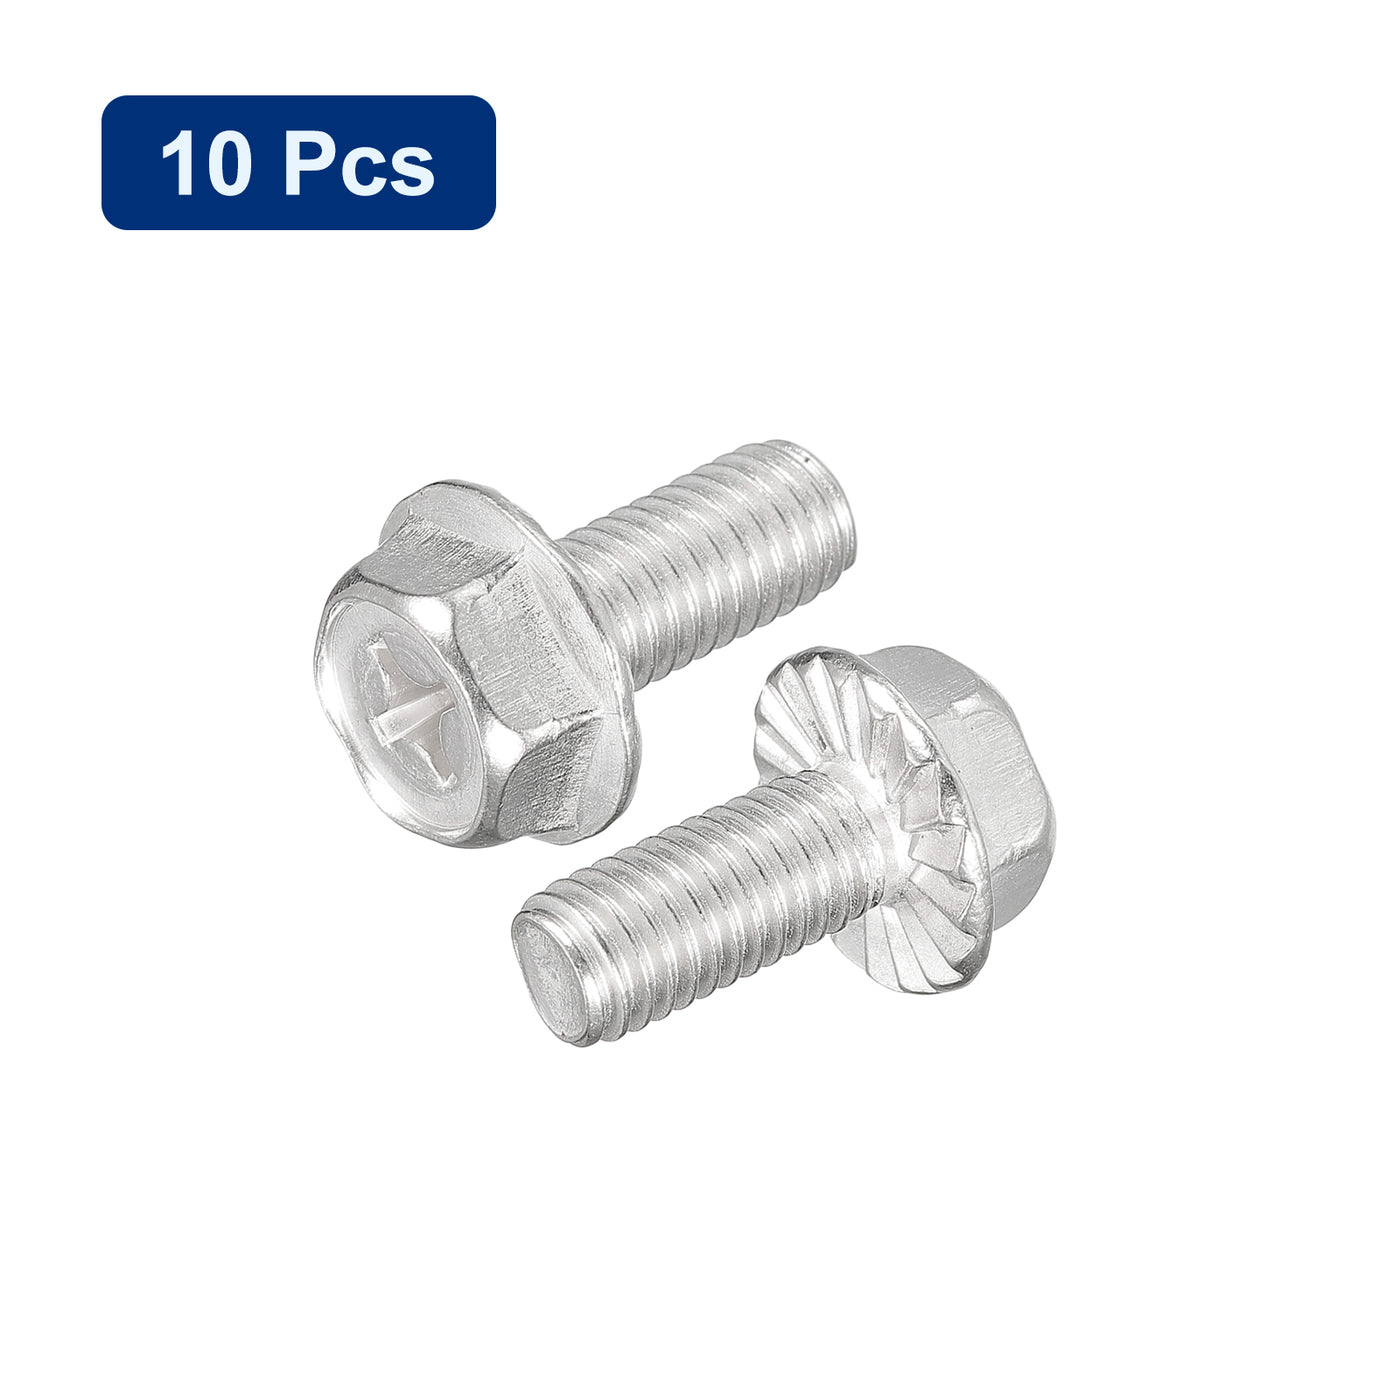 uxcell Uxcell M8x18mm Phillips Hex Head Flange Bolts, 10pcs 304 Stainless Steel Screws